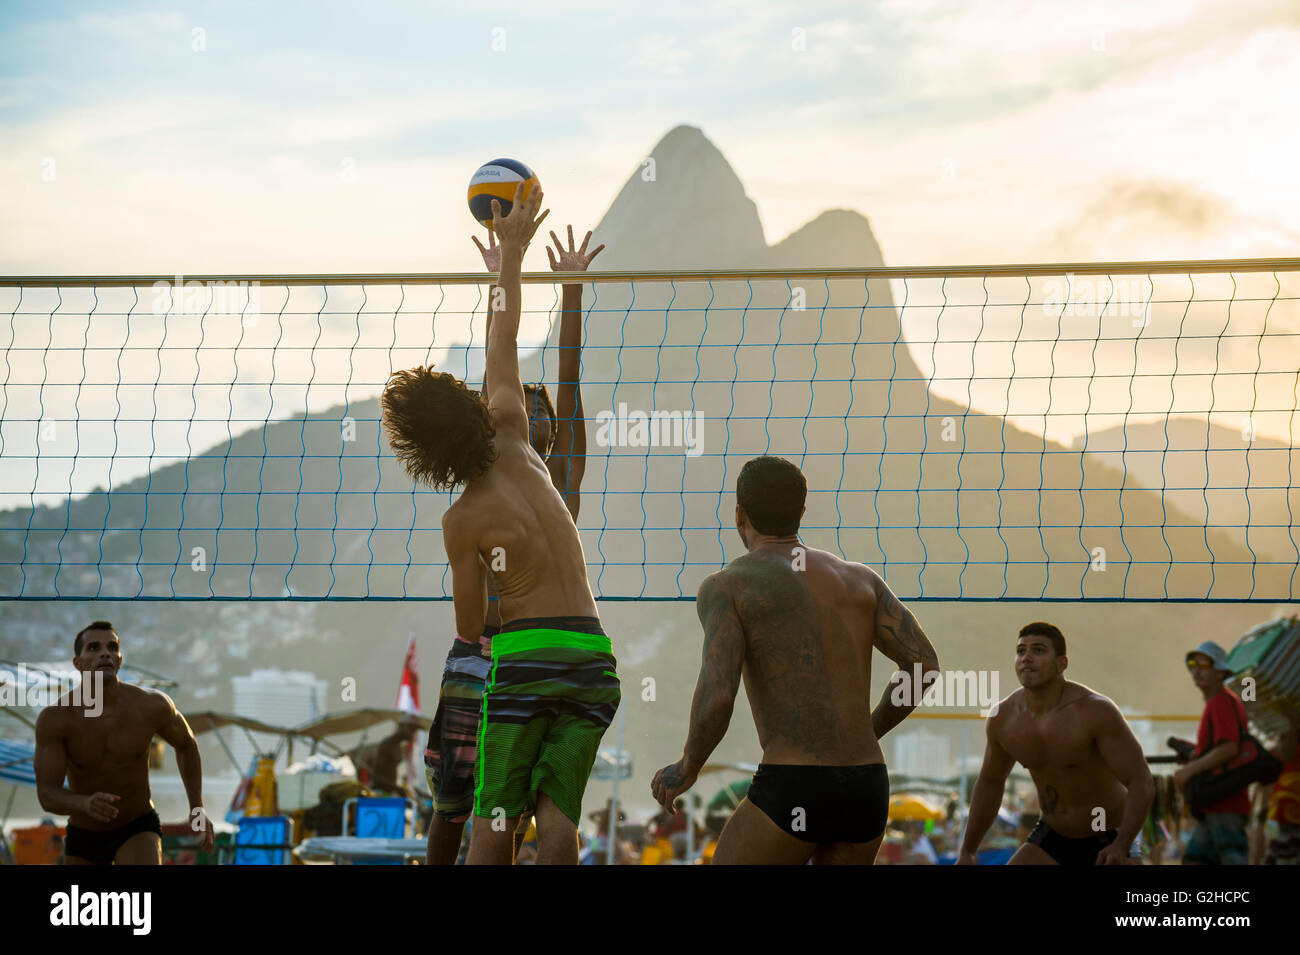 RIO DE JANEIRO - MARCH 20, 2016: Young carioca Brazilians play beach volleyball, an Olympic sport Brazil is favored to win. Stock Photo